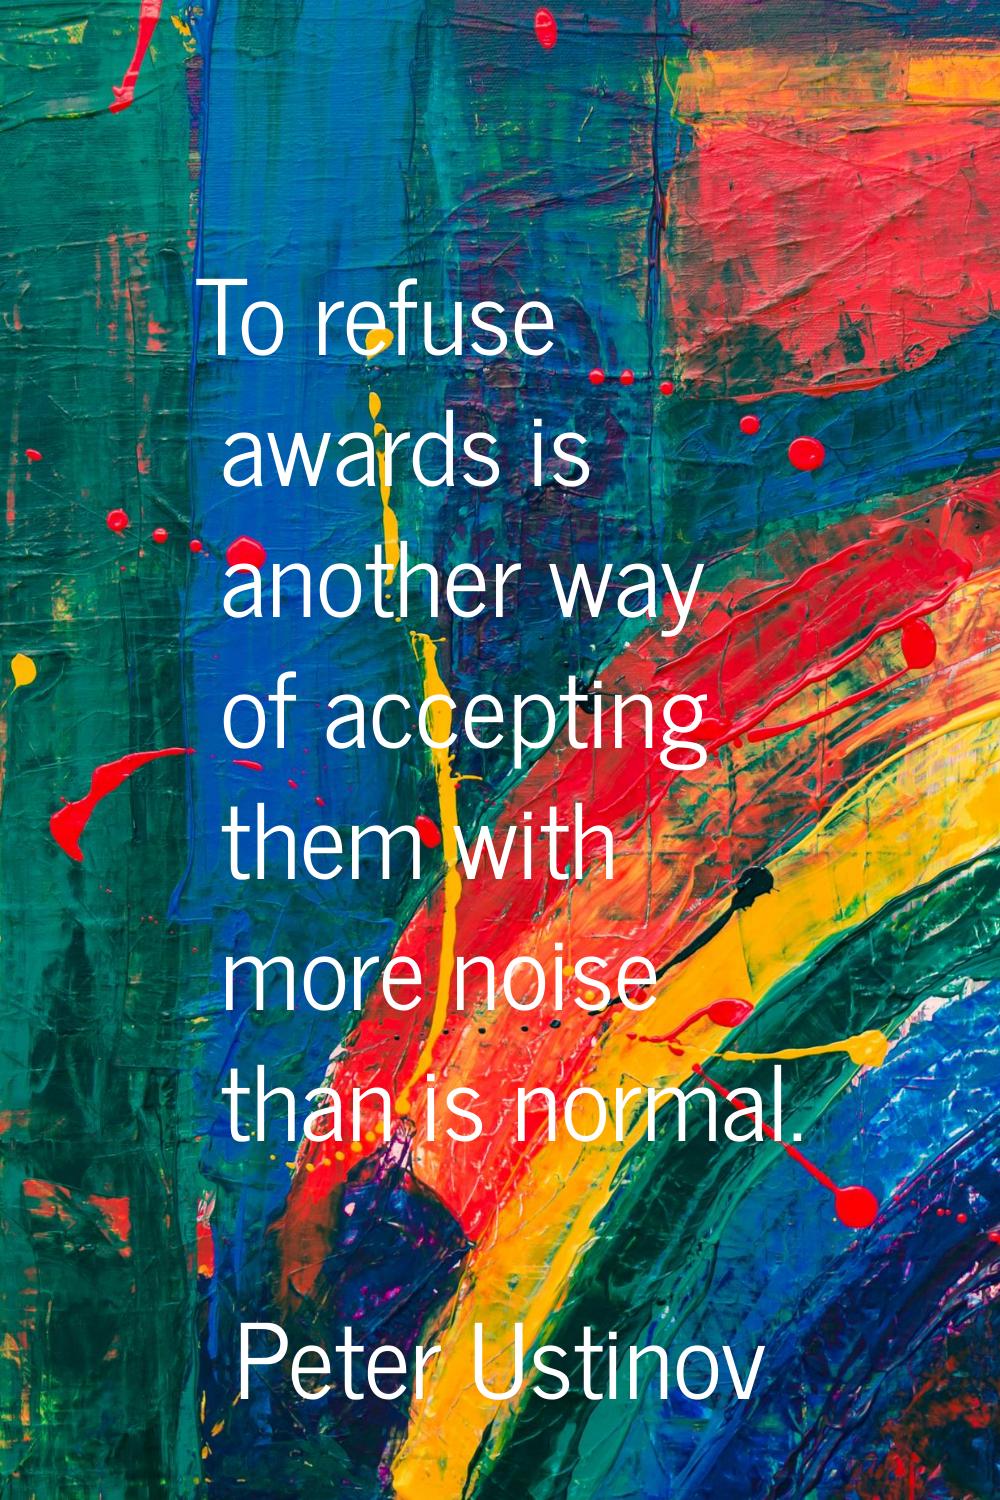 To refuse awards is another way of accepting them with more noise than is normal.